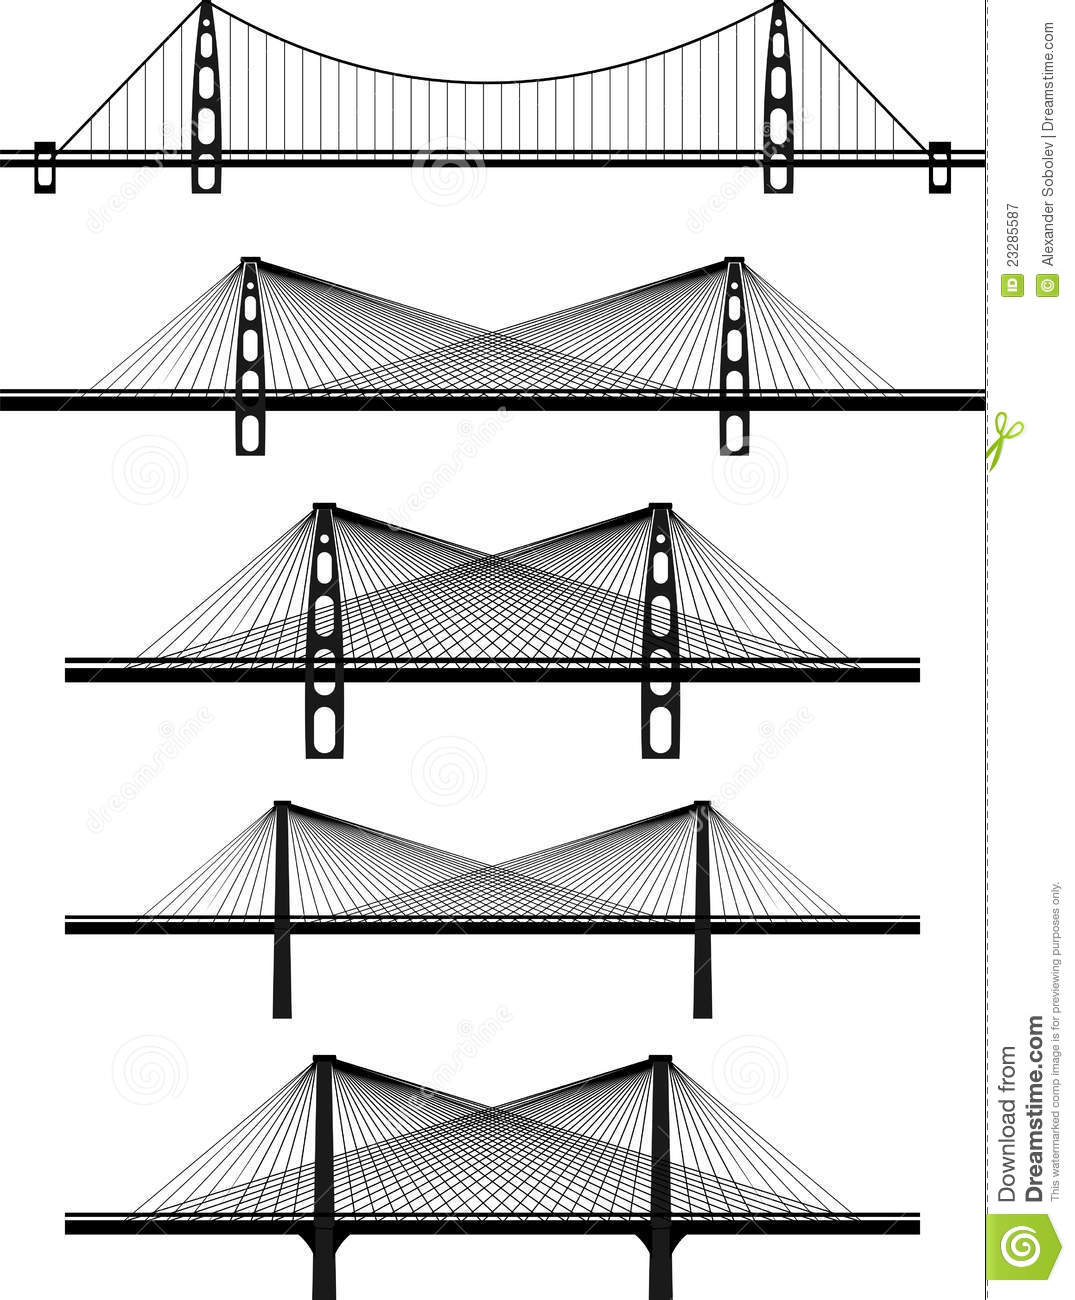 Set Of Metal Cable Suspension Bridges Royalty Free Stock Photography